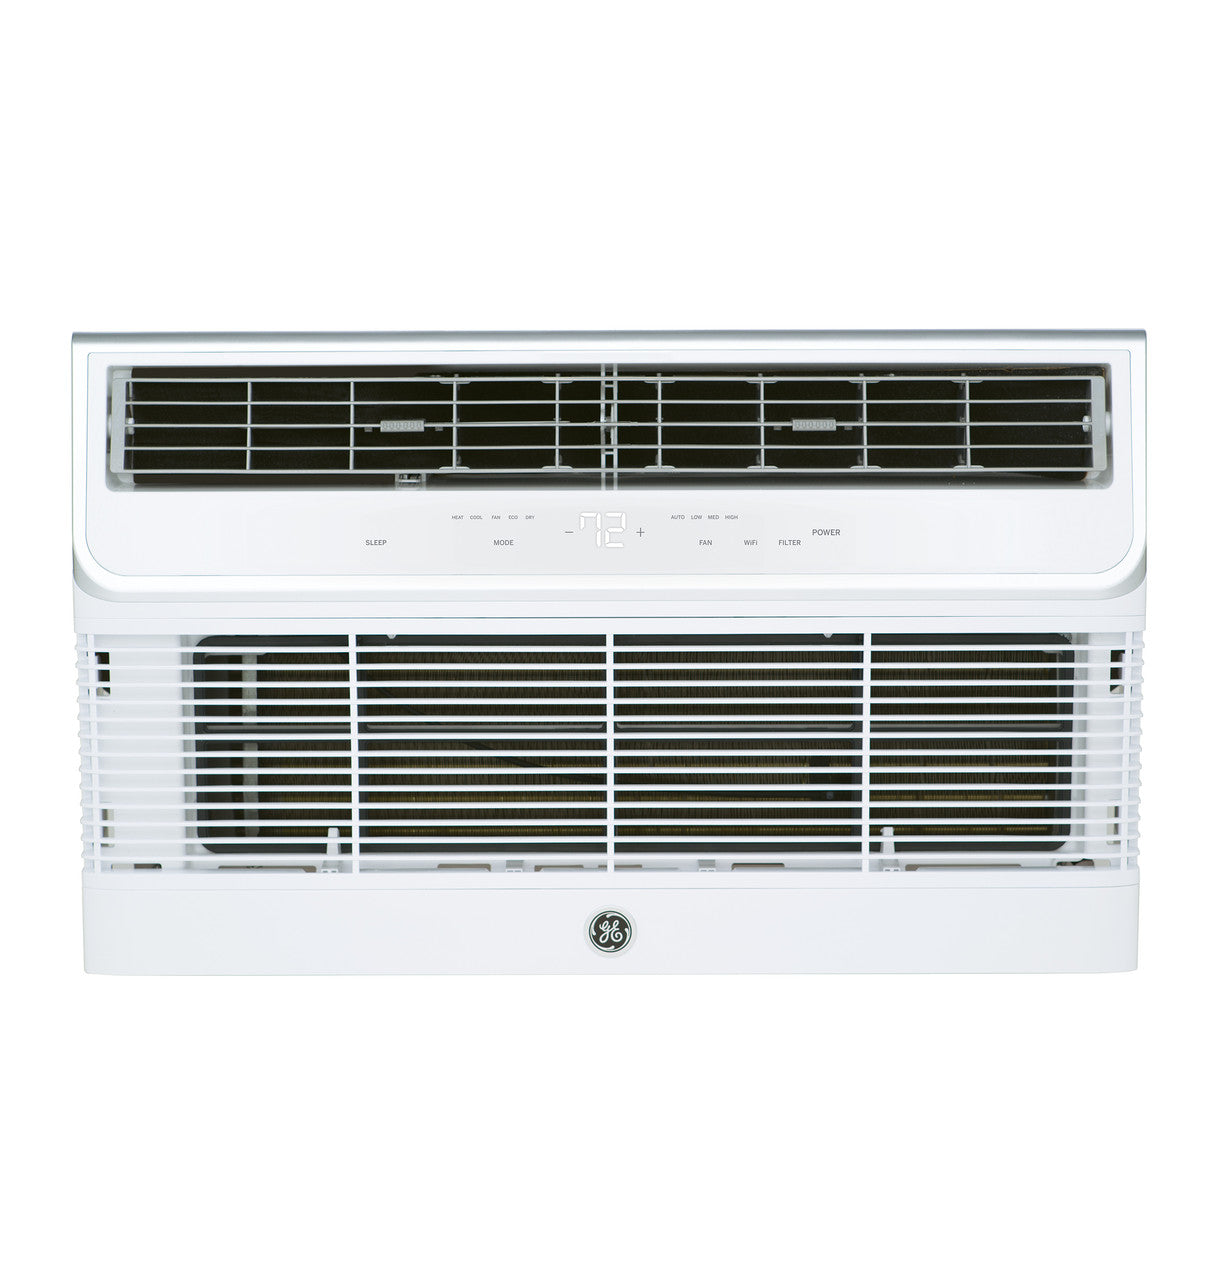 GE 12,000 BTU 208/230 Volt Through-the-Wall Air Conditioner with Electric Heat - AJEQ12DWJ